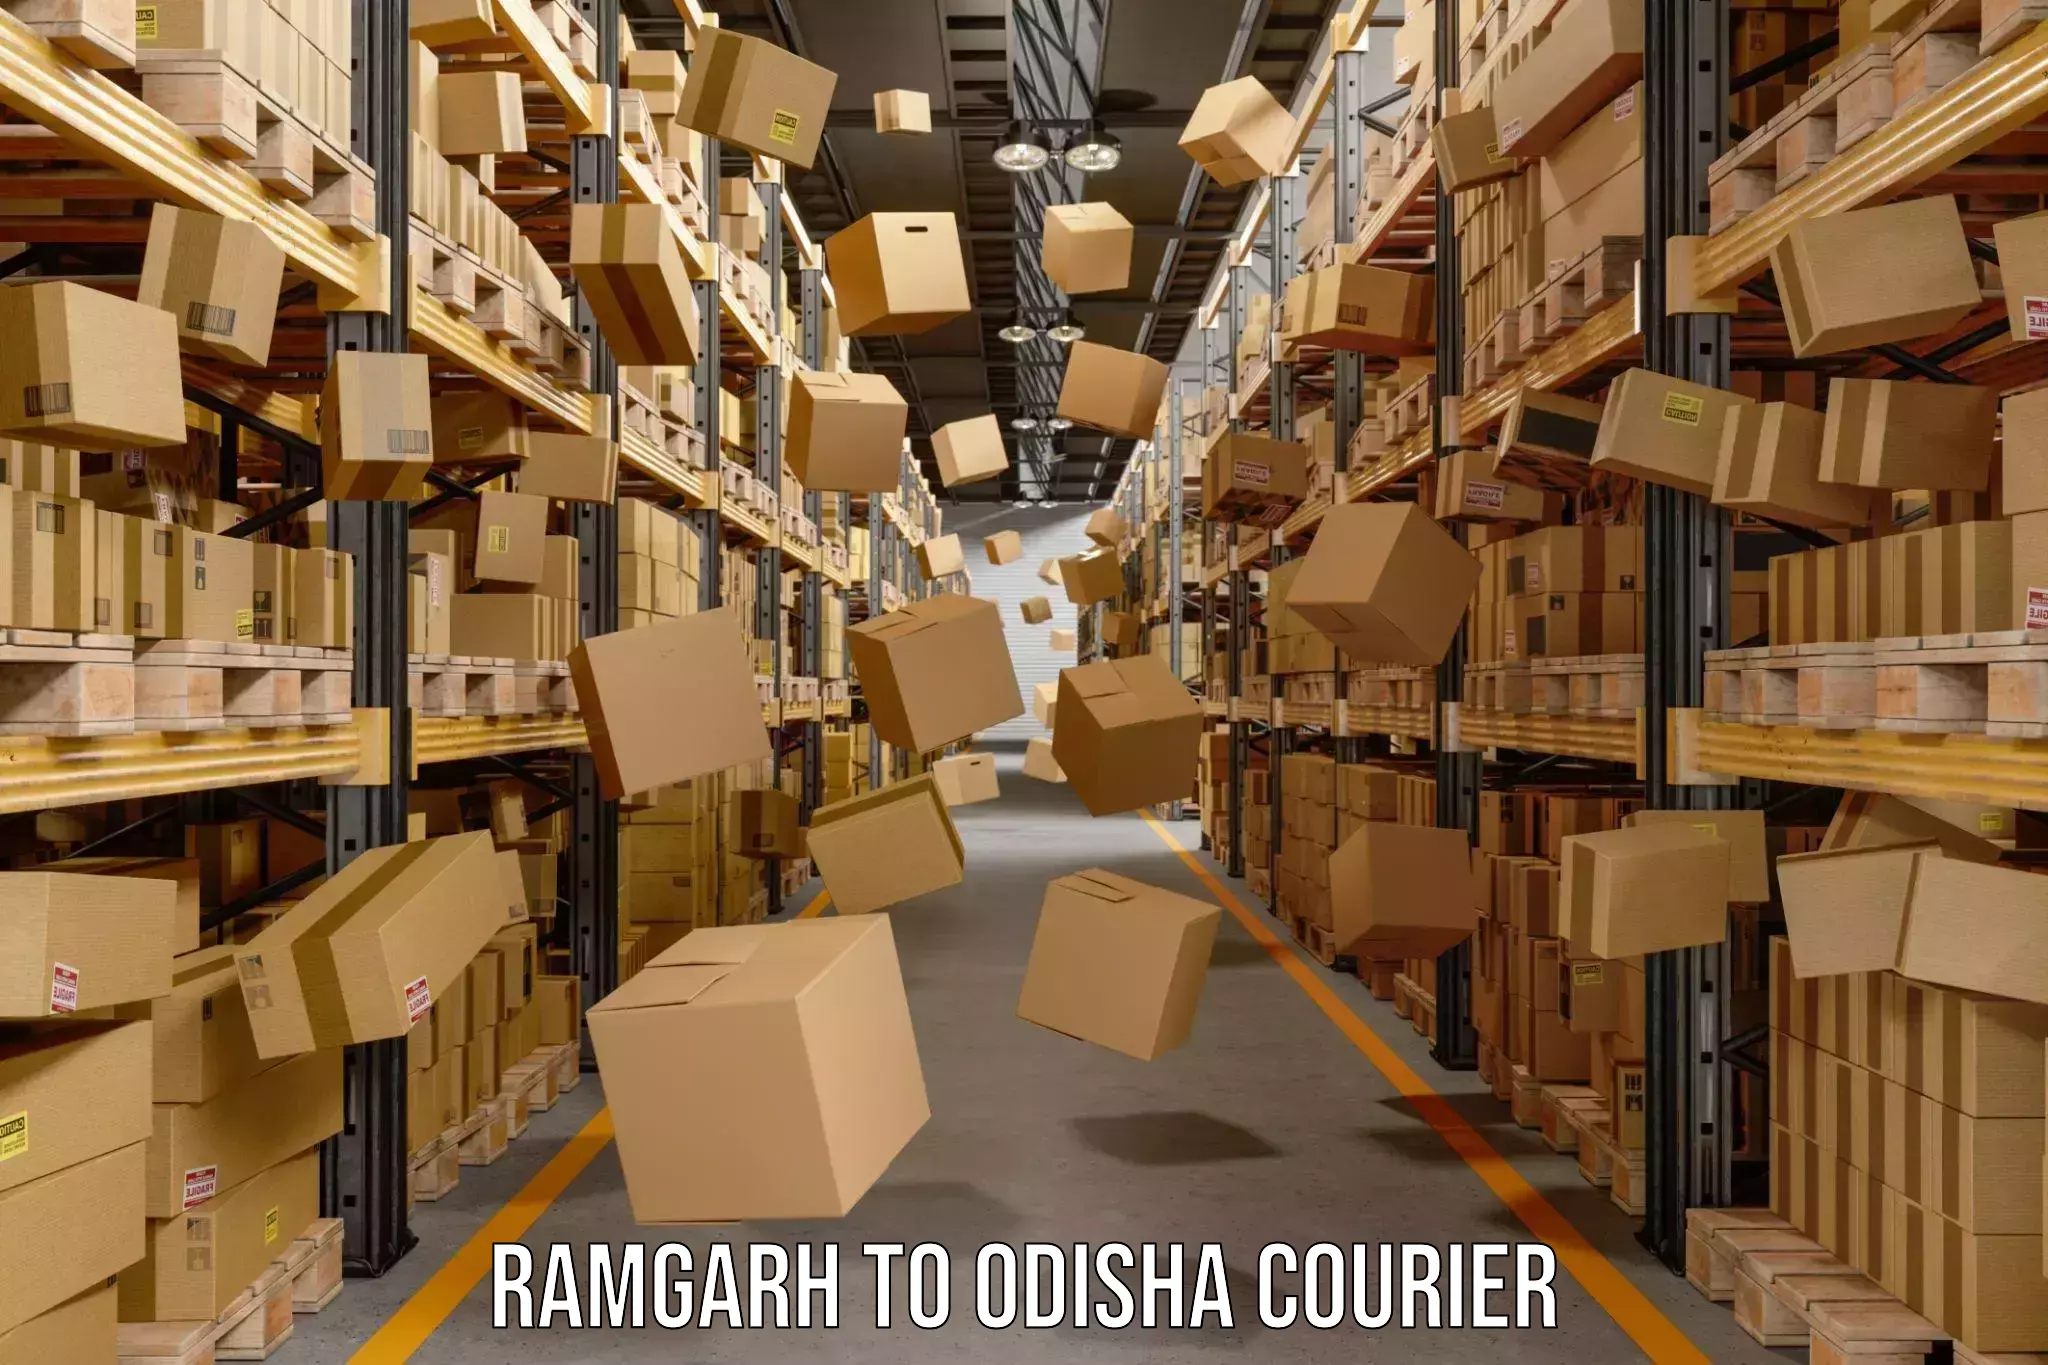 Courier service efficiency Ramgarh to Dhenkanal